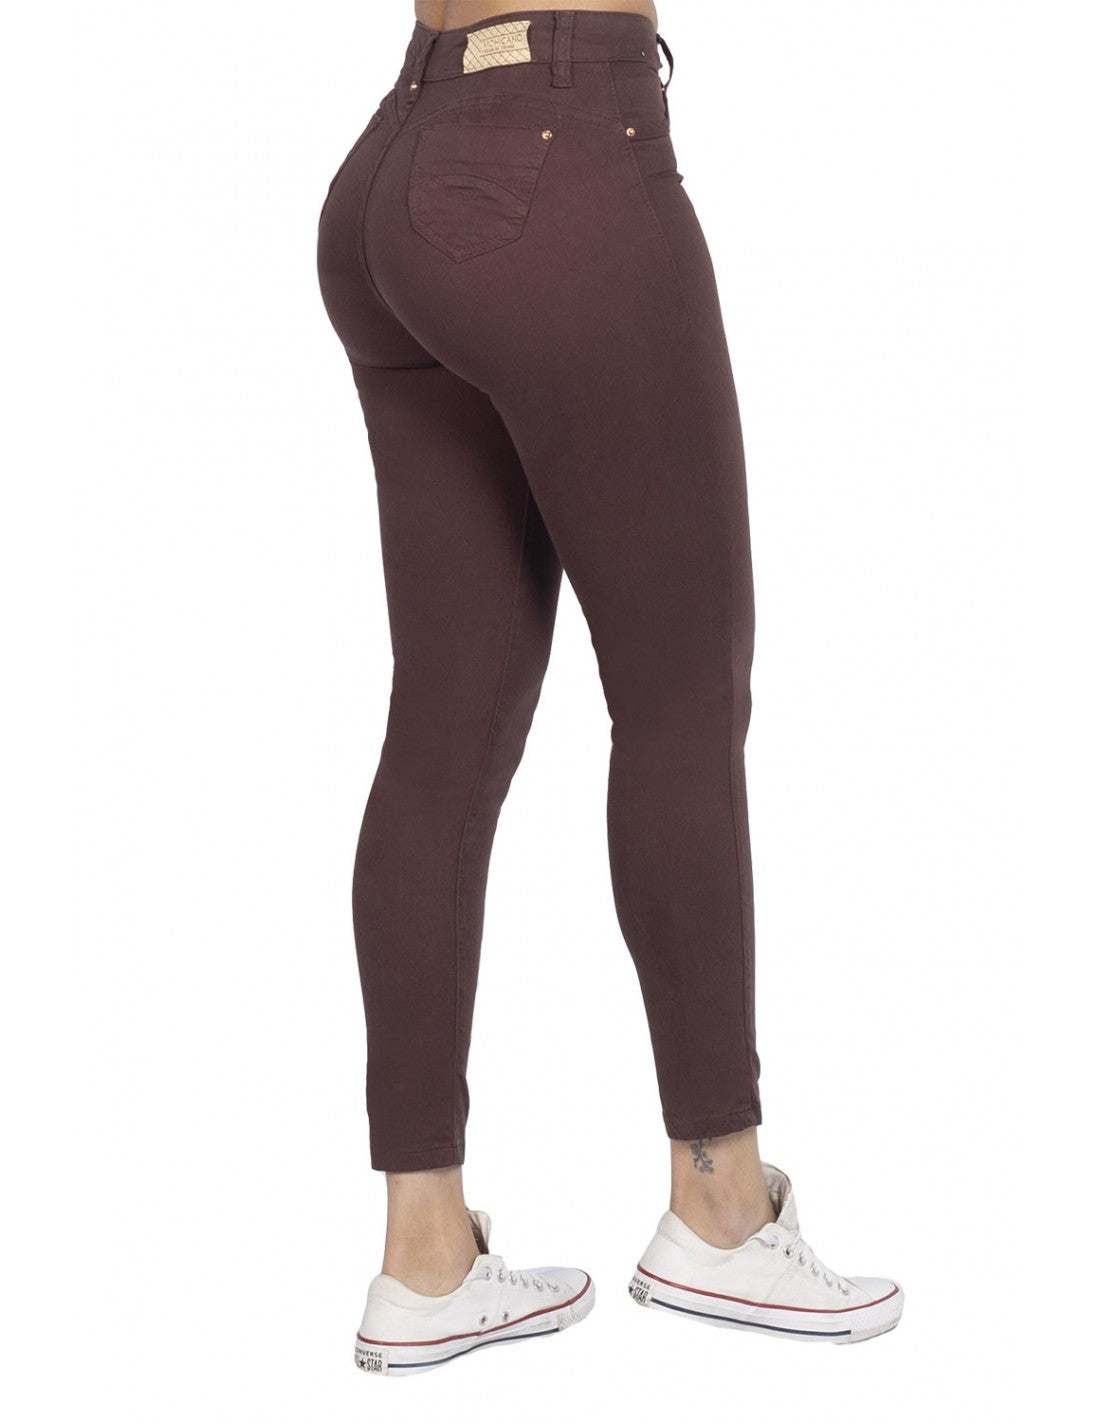 Jeans Mujer Tobillero 3140 Chocolate